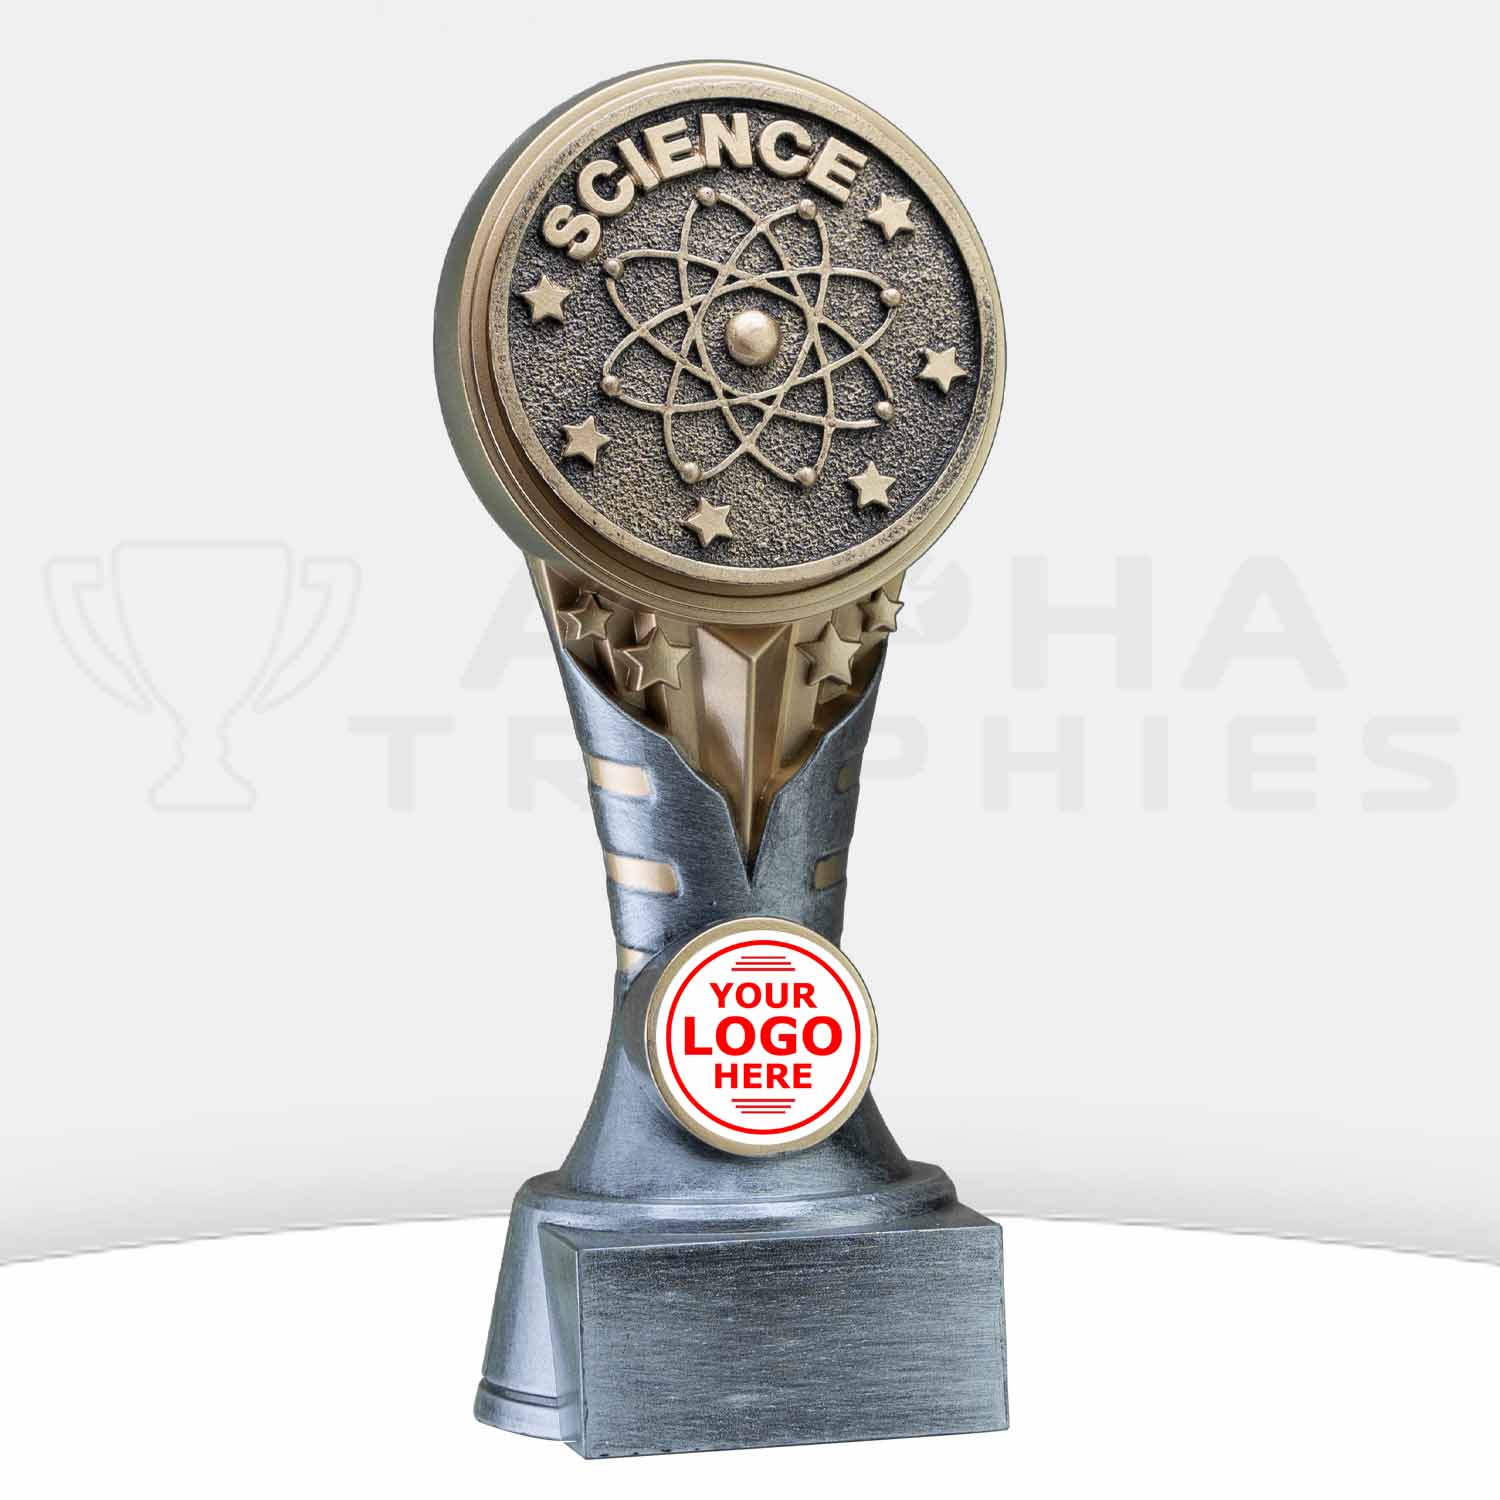 ikon-trophy-science-kn212a-front-with-logo